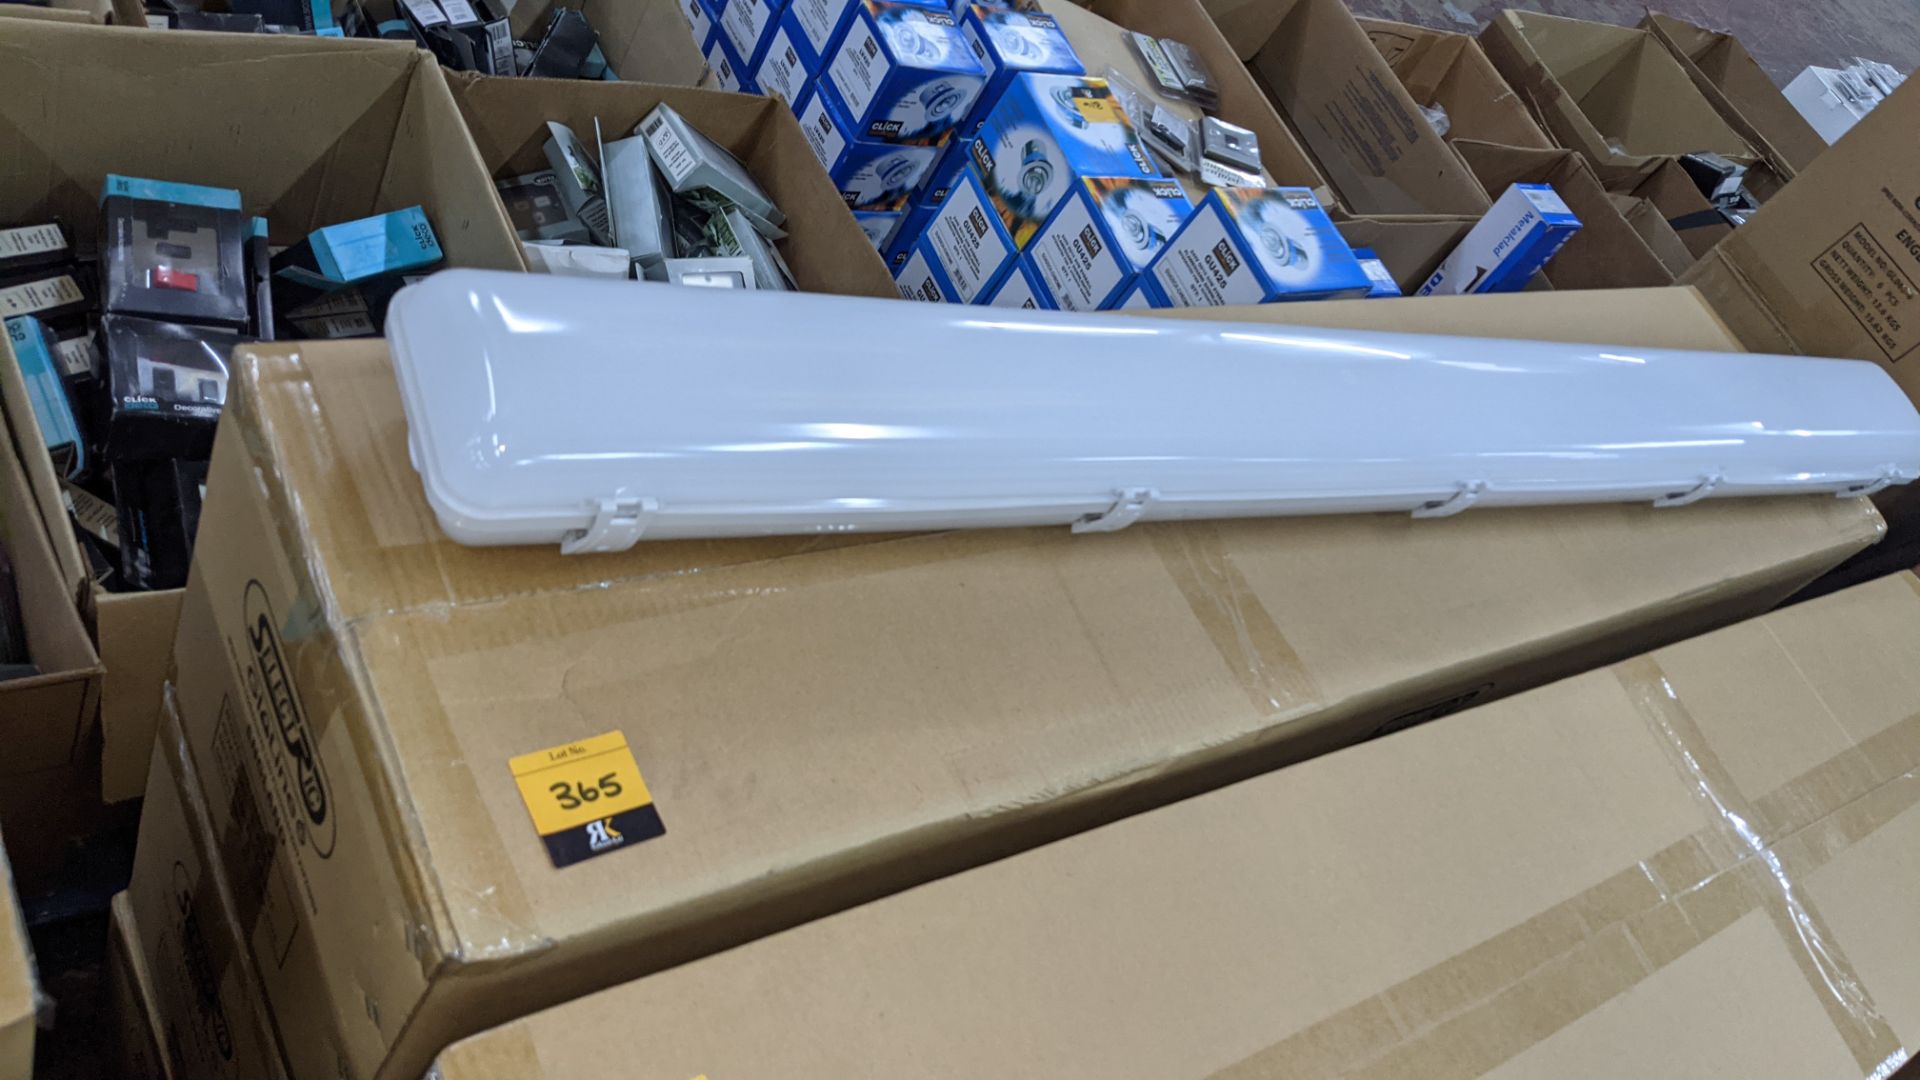 18 off IP65 non-corrosive LED fluorescent light fittings. Model GLO65-4, 4', twin LED 40W, polycarb